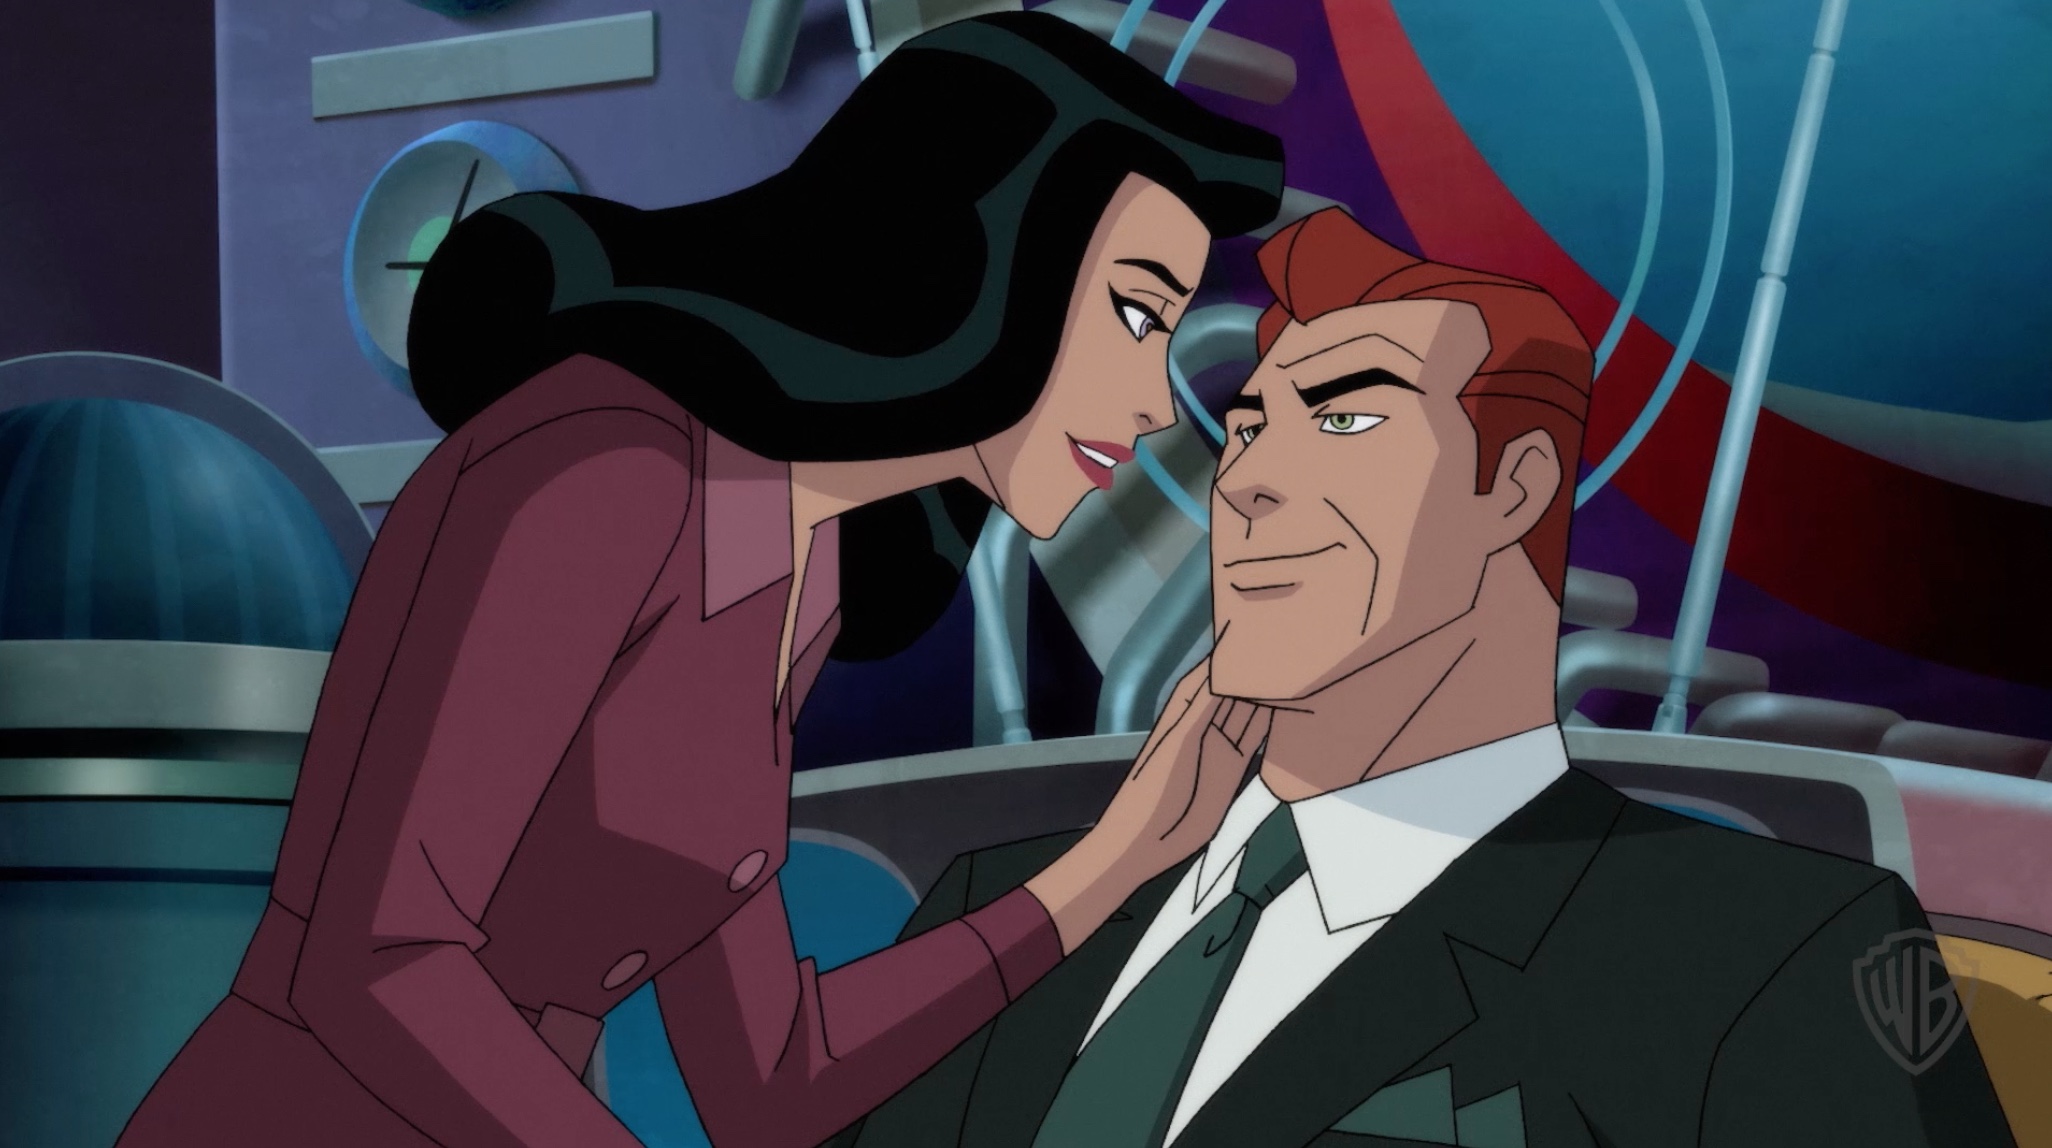 Superman: Red Son Clip Shows Lex Luthor and Lois Lane Relationship